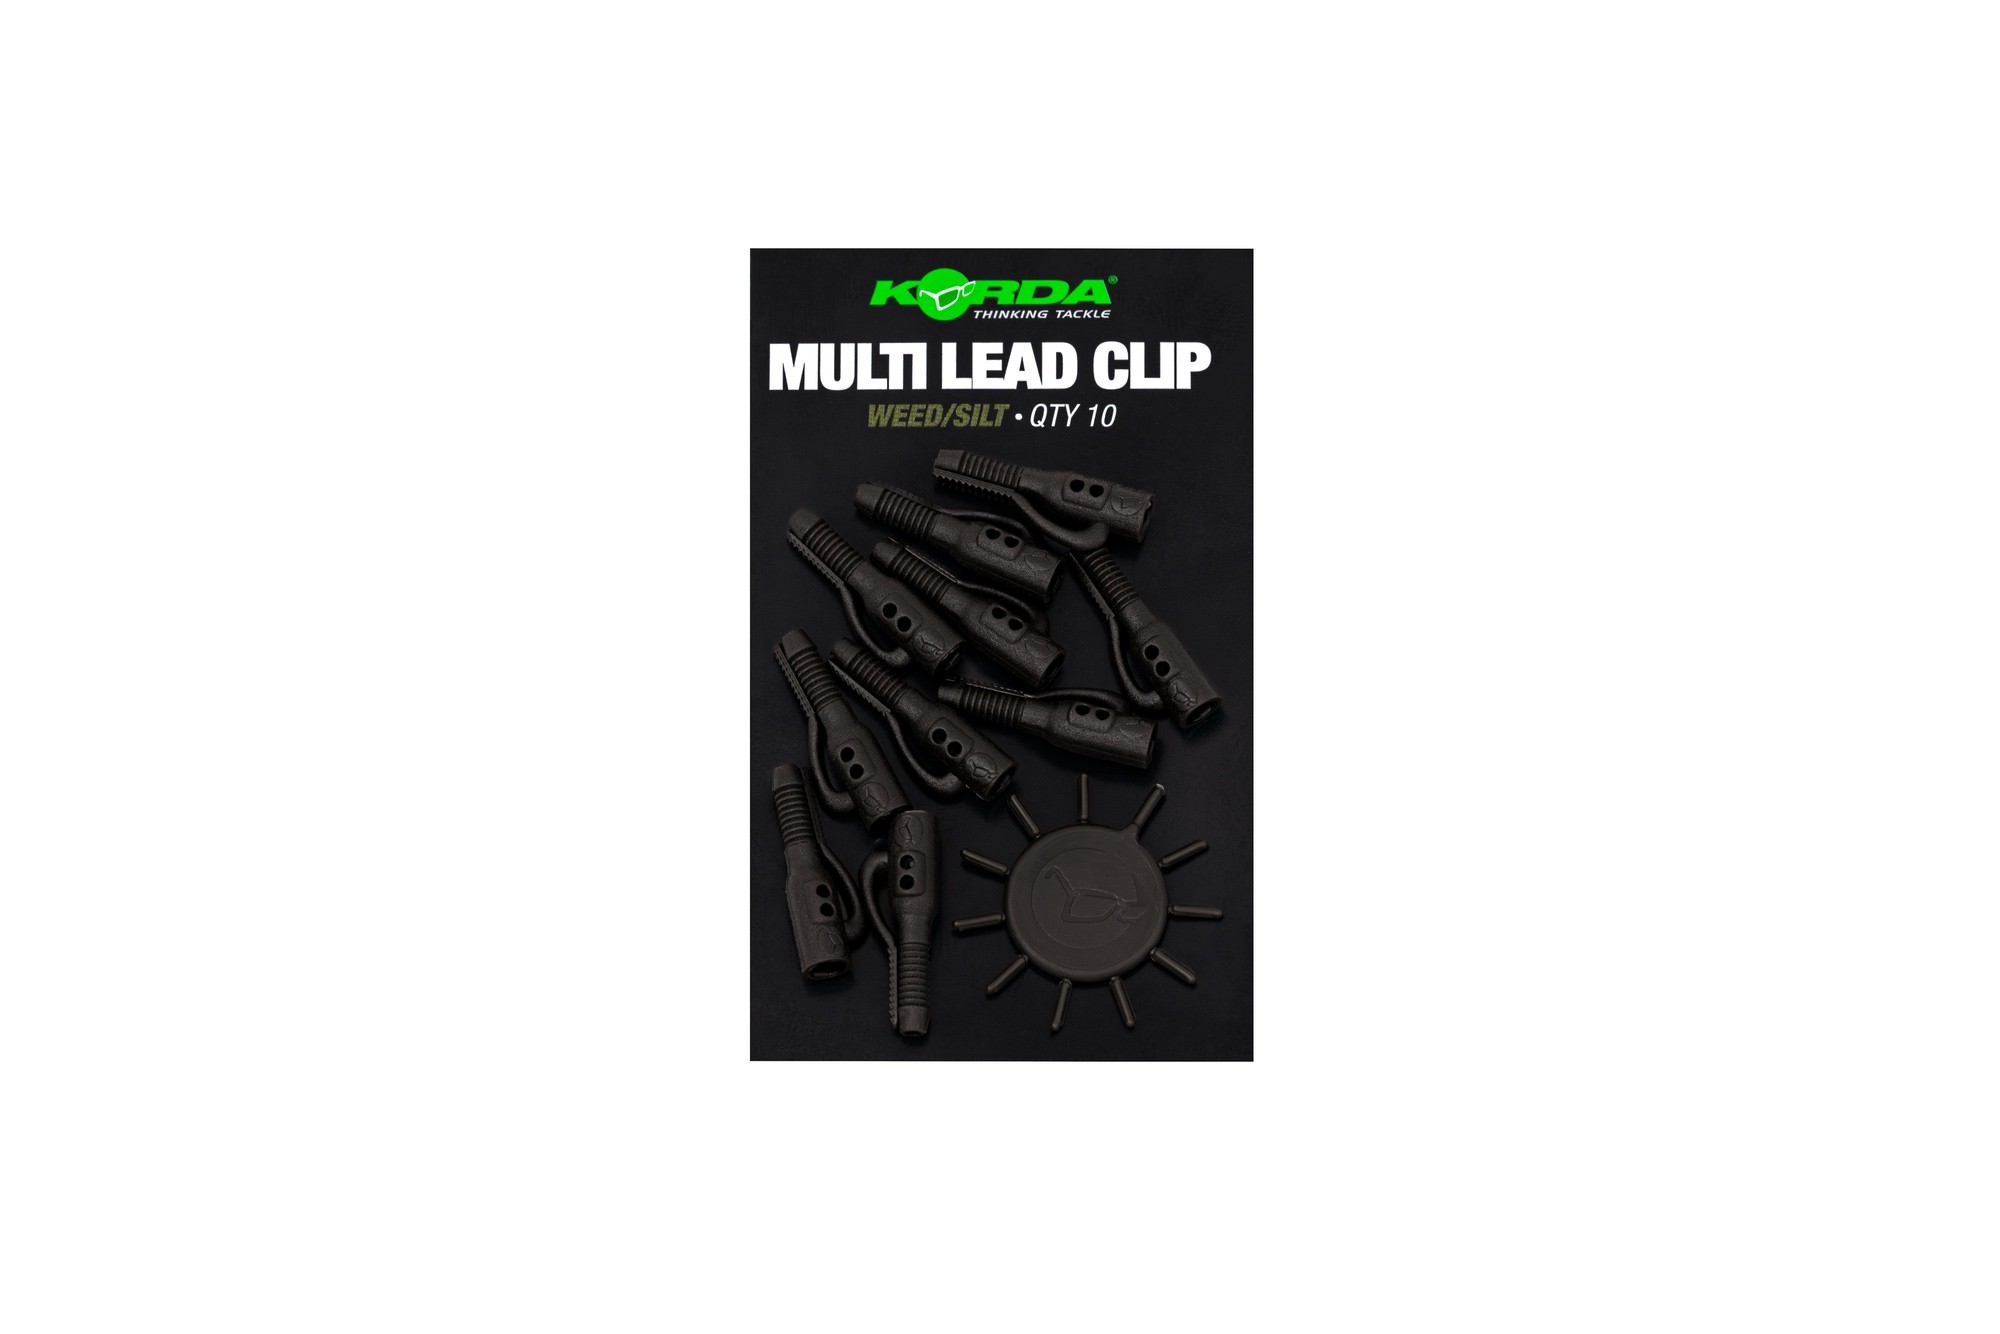 Clips plombs Korda Lead Clip Pin (10 pcs) - Weed/Silt - Herbe/Limon